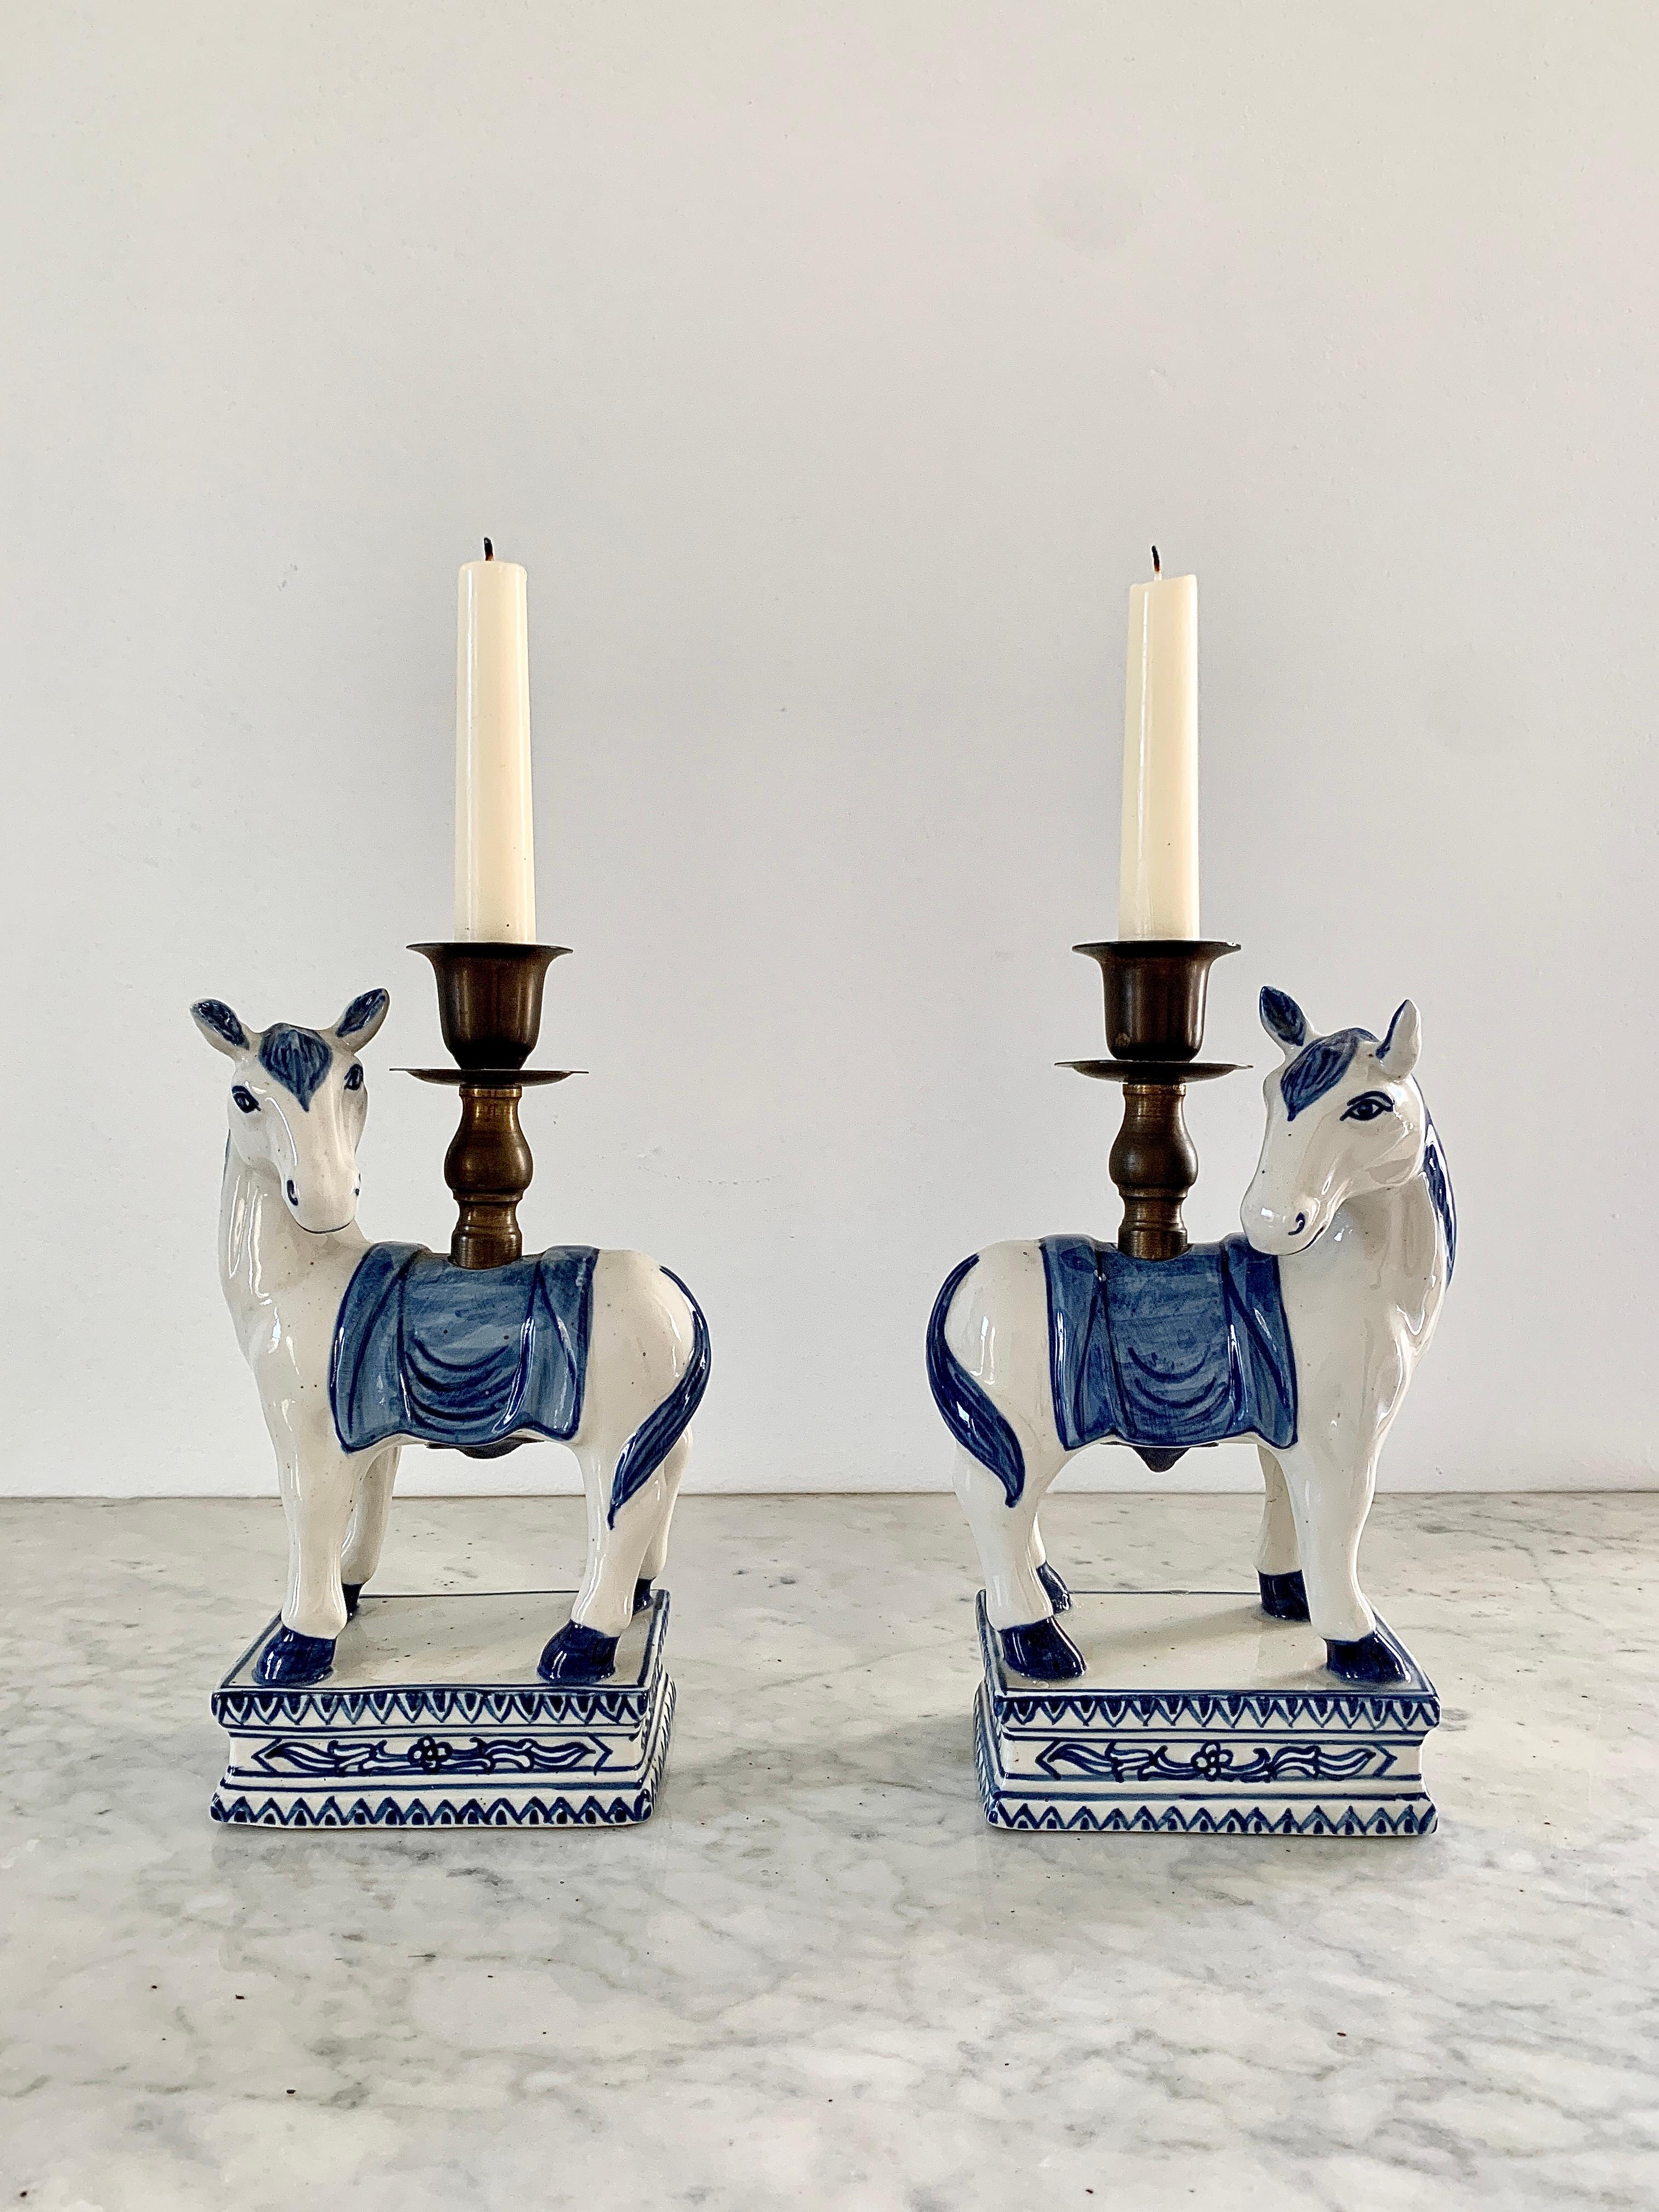 A wonderful pair of blue and white porcelain & brass horse candle holders.

Italy, circa mid-20th century.

Measures: 5.5